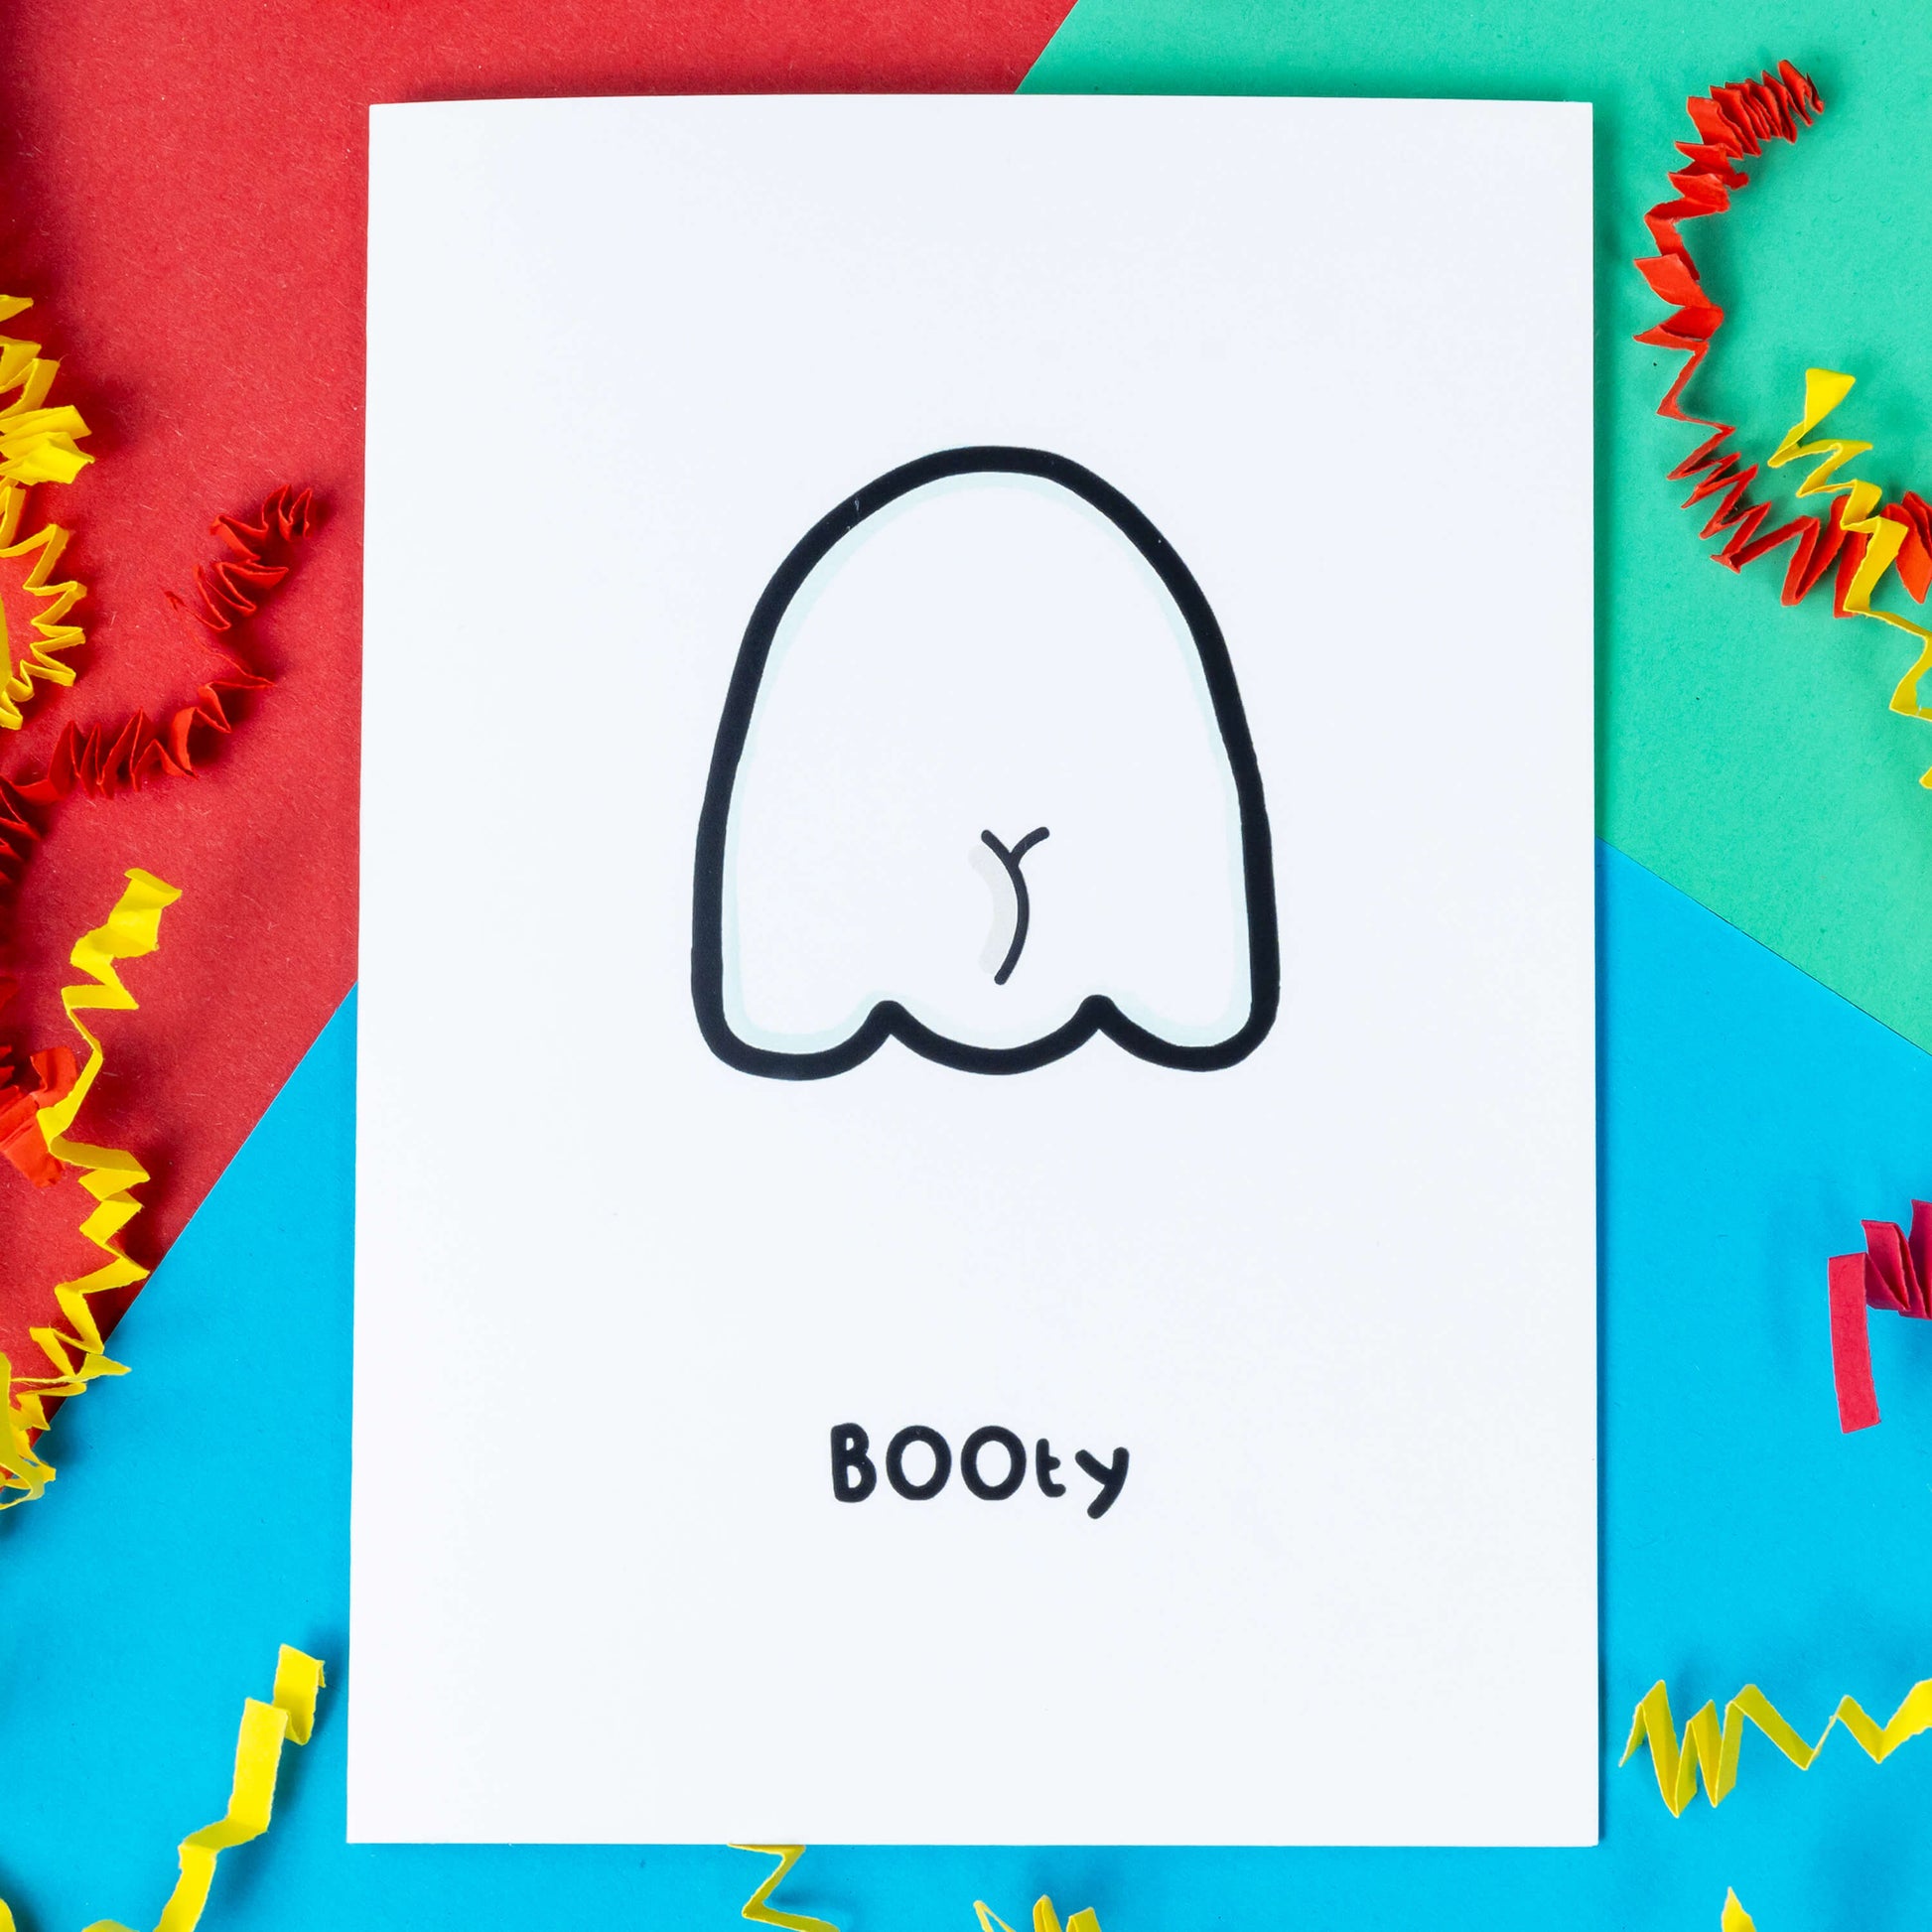 The Booty Ghost a6 card on a blue, red and green background with yellow and red crinkle card confetti. A white greeting card with an illustration of the back of a ghost with a bum crack. The word 'BOOty" is written in black underneath the drawing.